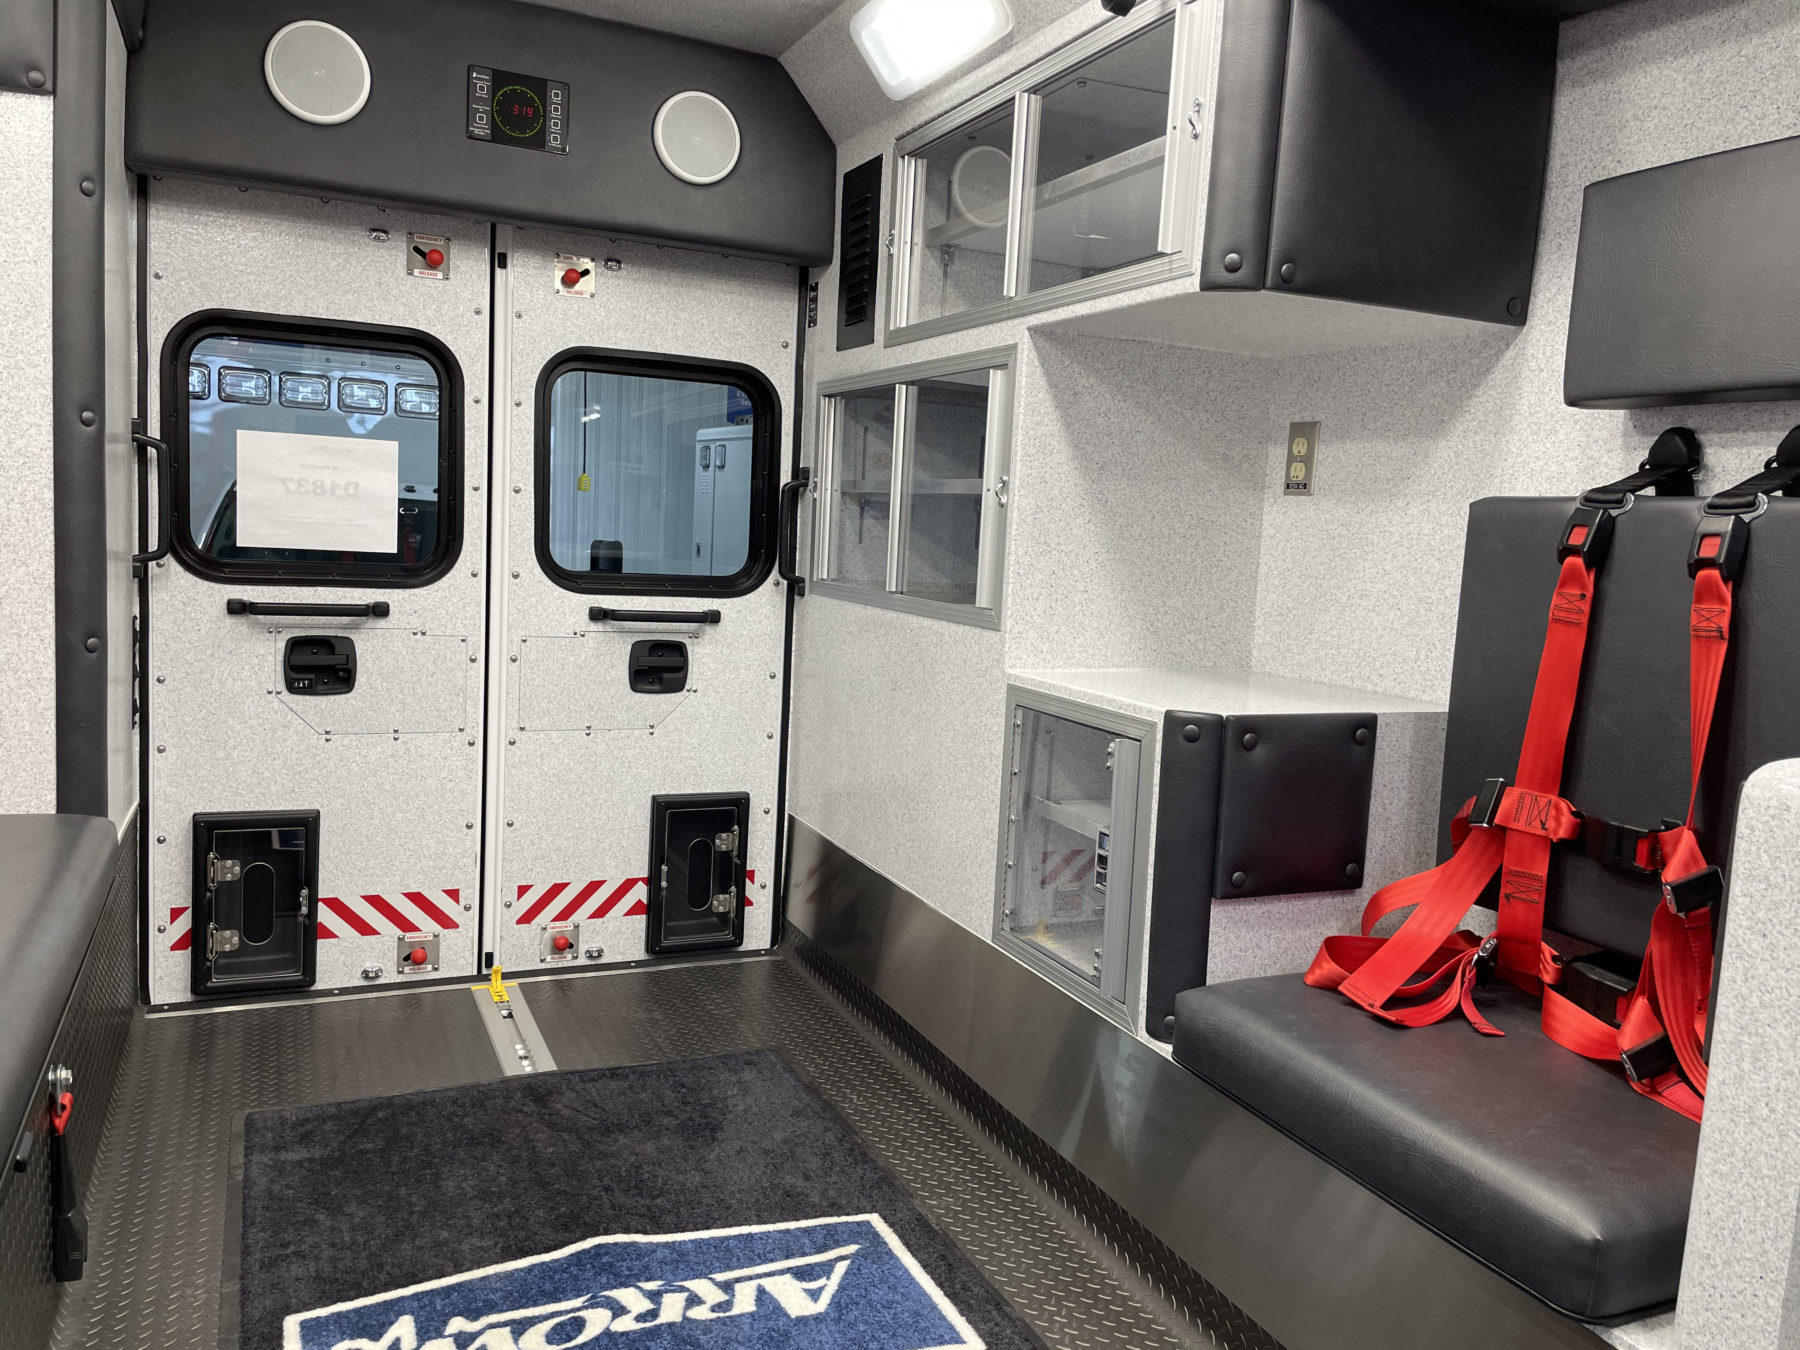 2020 Ram 4500 4x4 Heavy Duty Ambulance For Sale – Picture 12